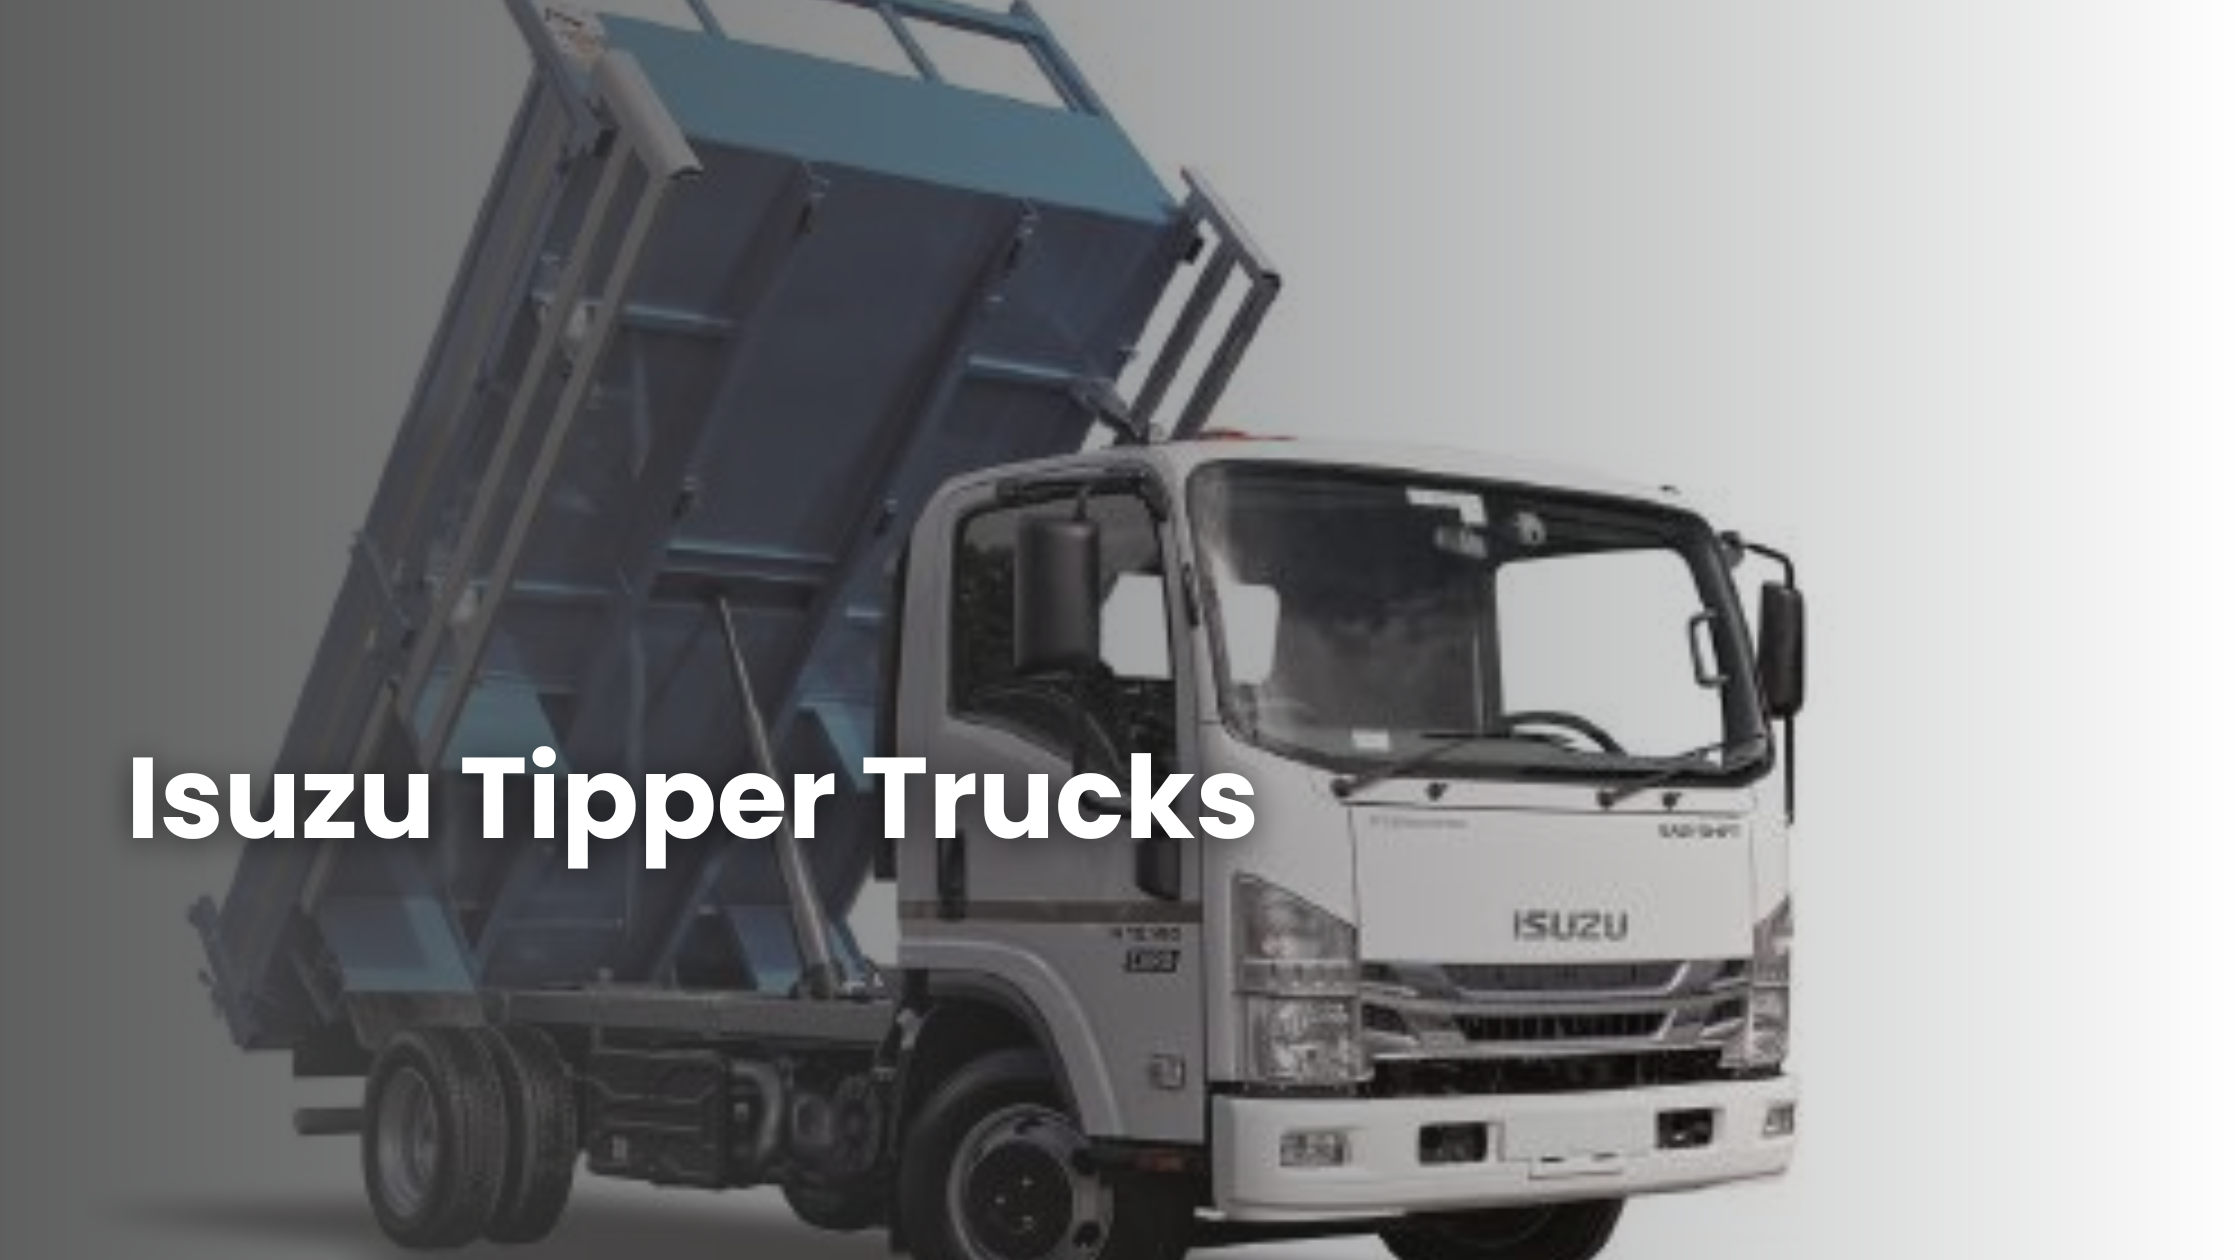 Tipper Trucks - What are they and why are they used